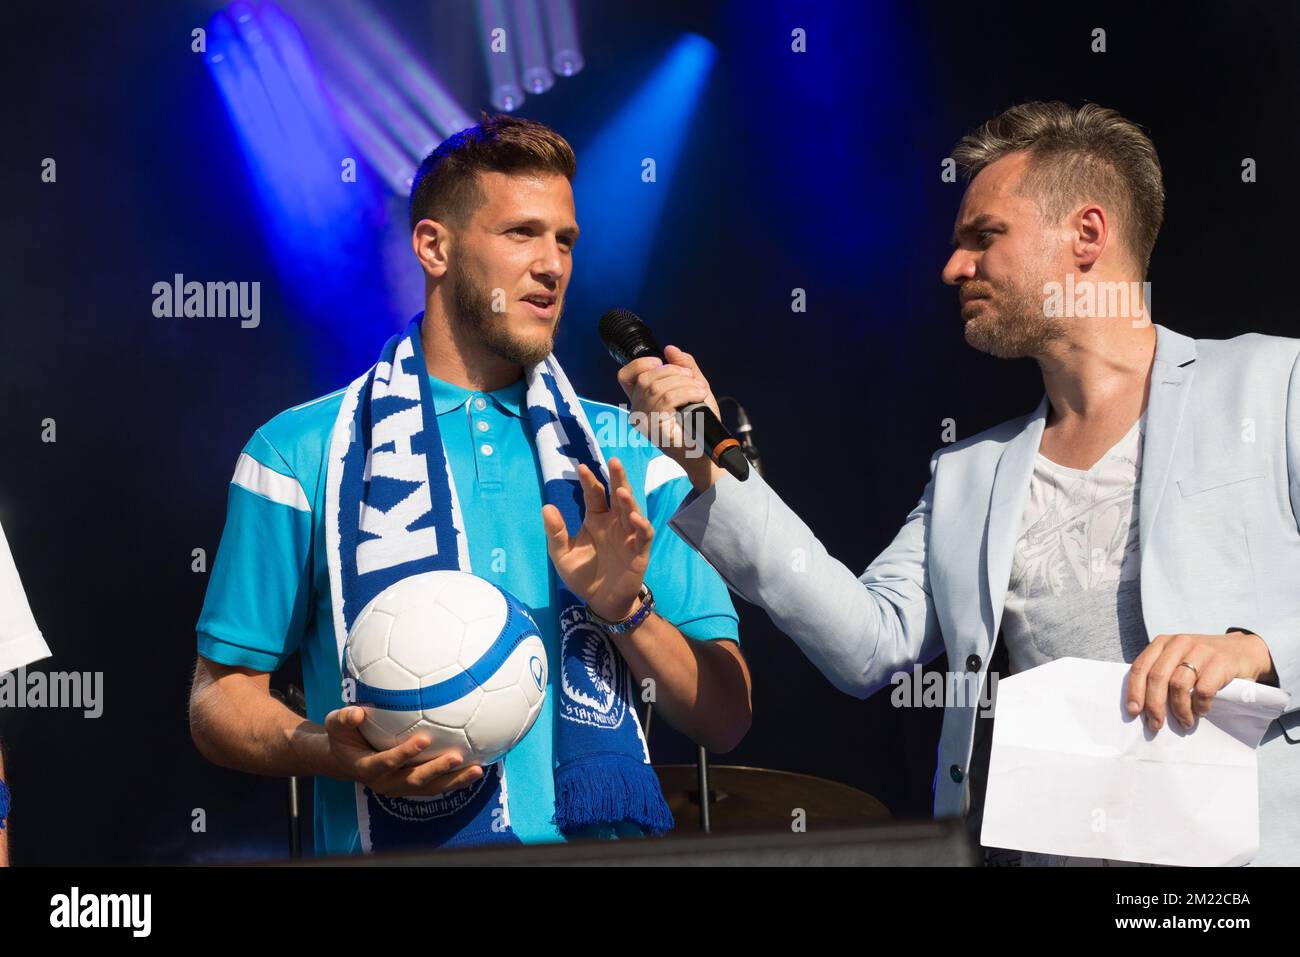 Gent's Rami Gershon pictured during the official presentation of the  2016-2017 squad of Belgian first division soccer team KAA Gent, at the  173rd edition of the 'Gentse Feesten' city festival in Gent,